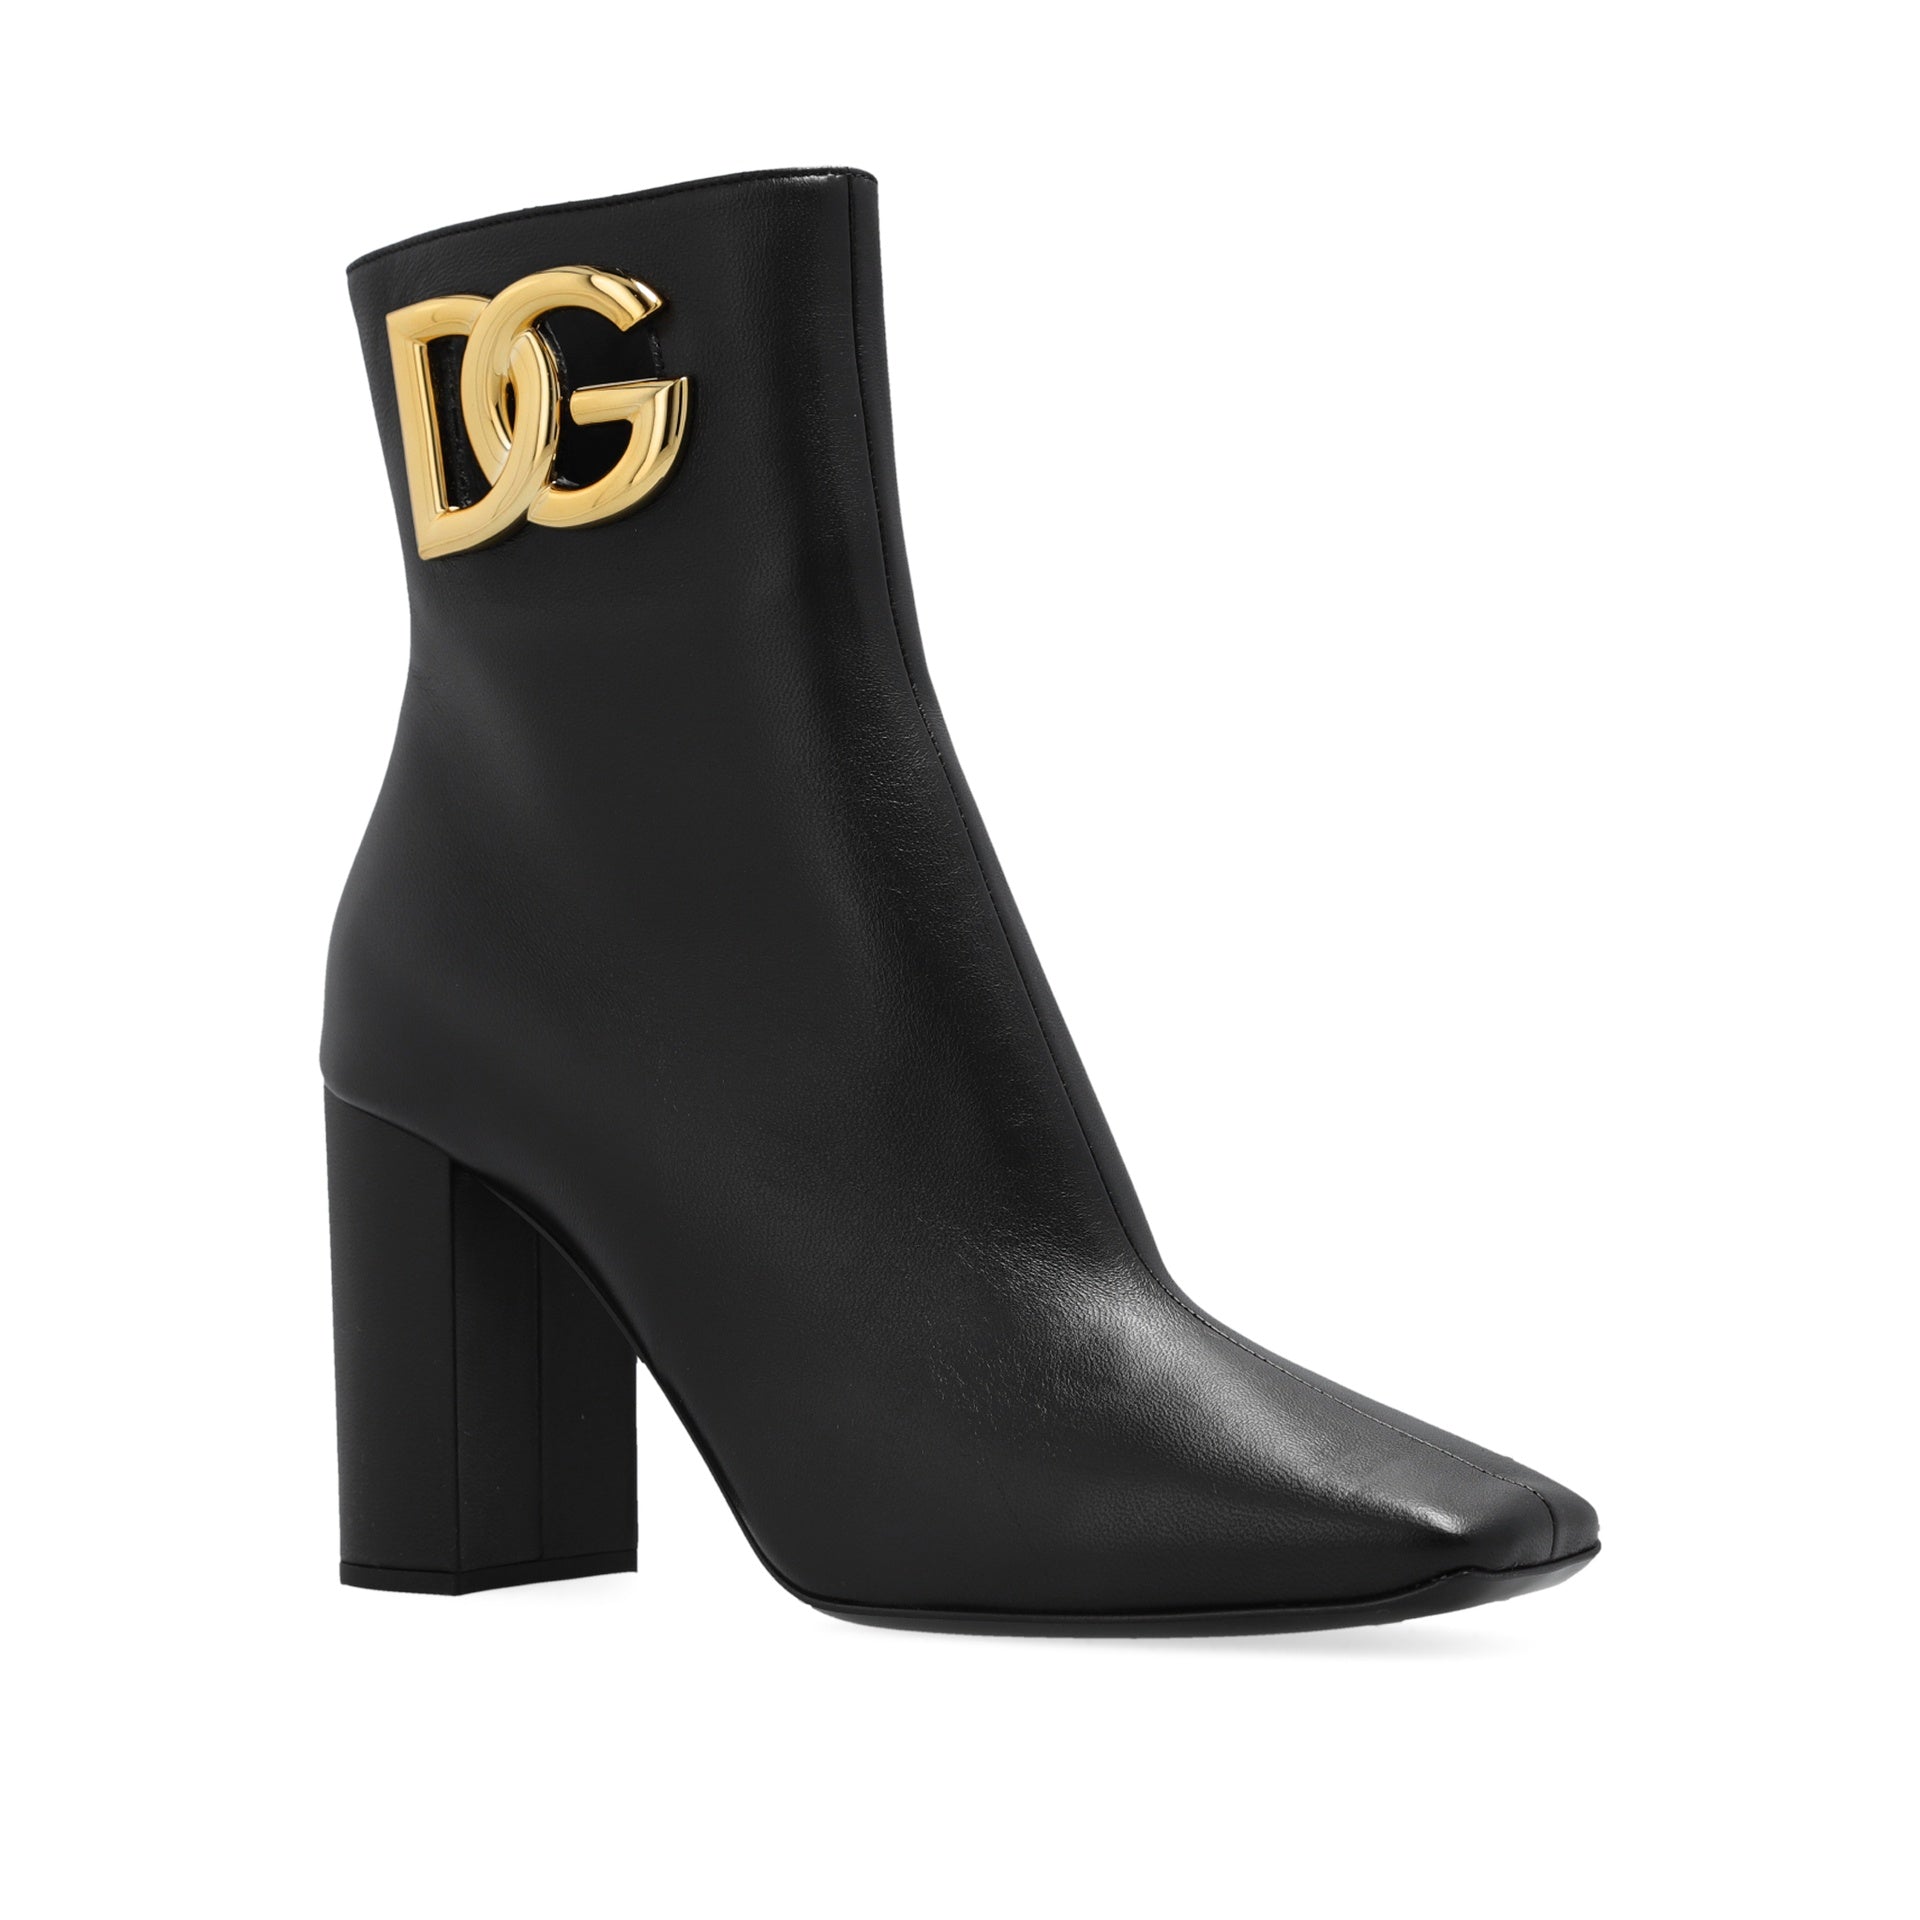 Dolce & Gabbana Heeled Leather Boots